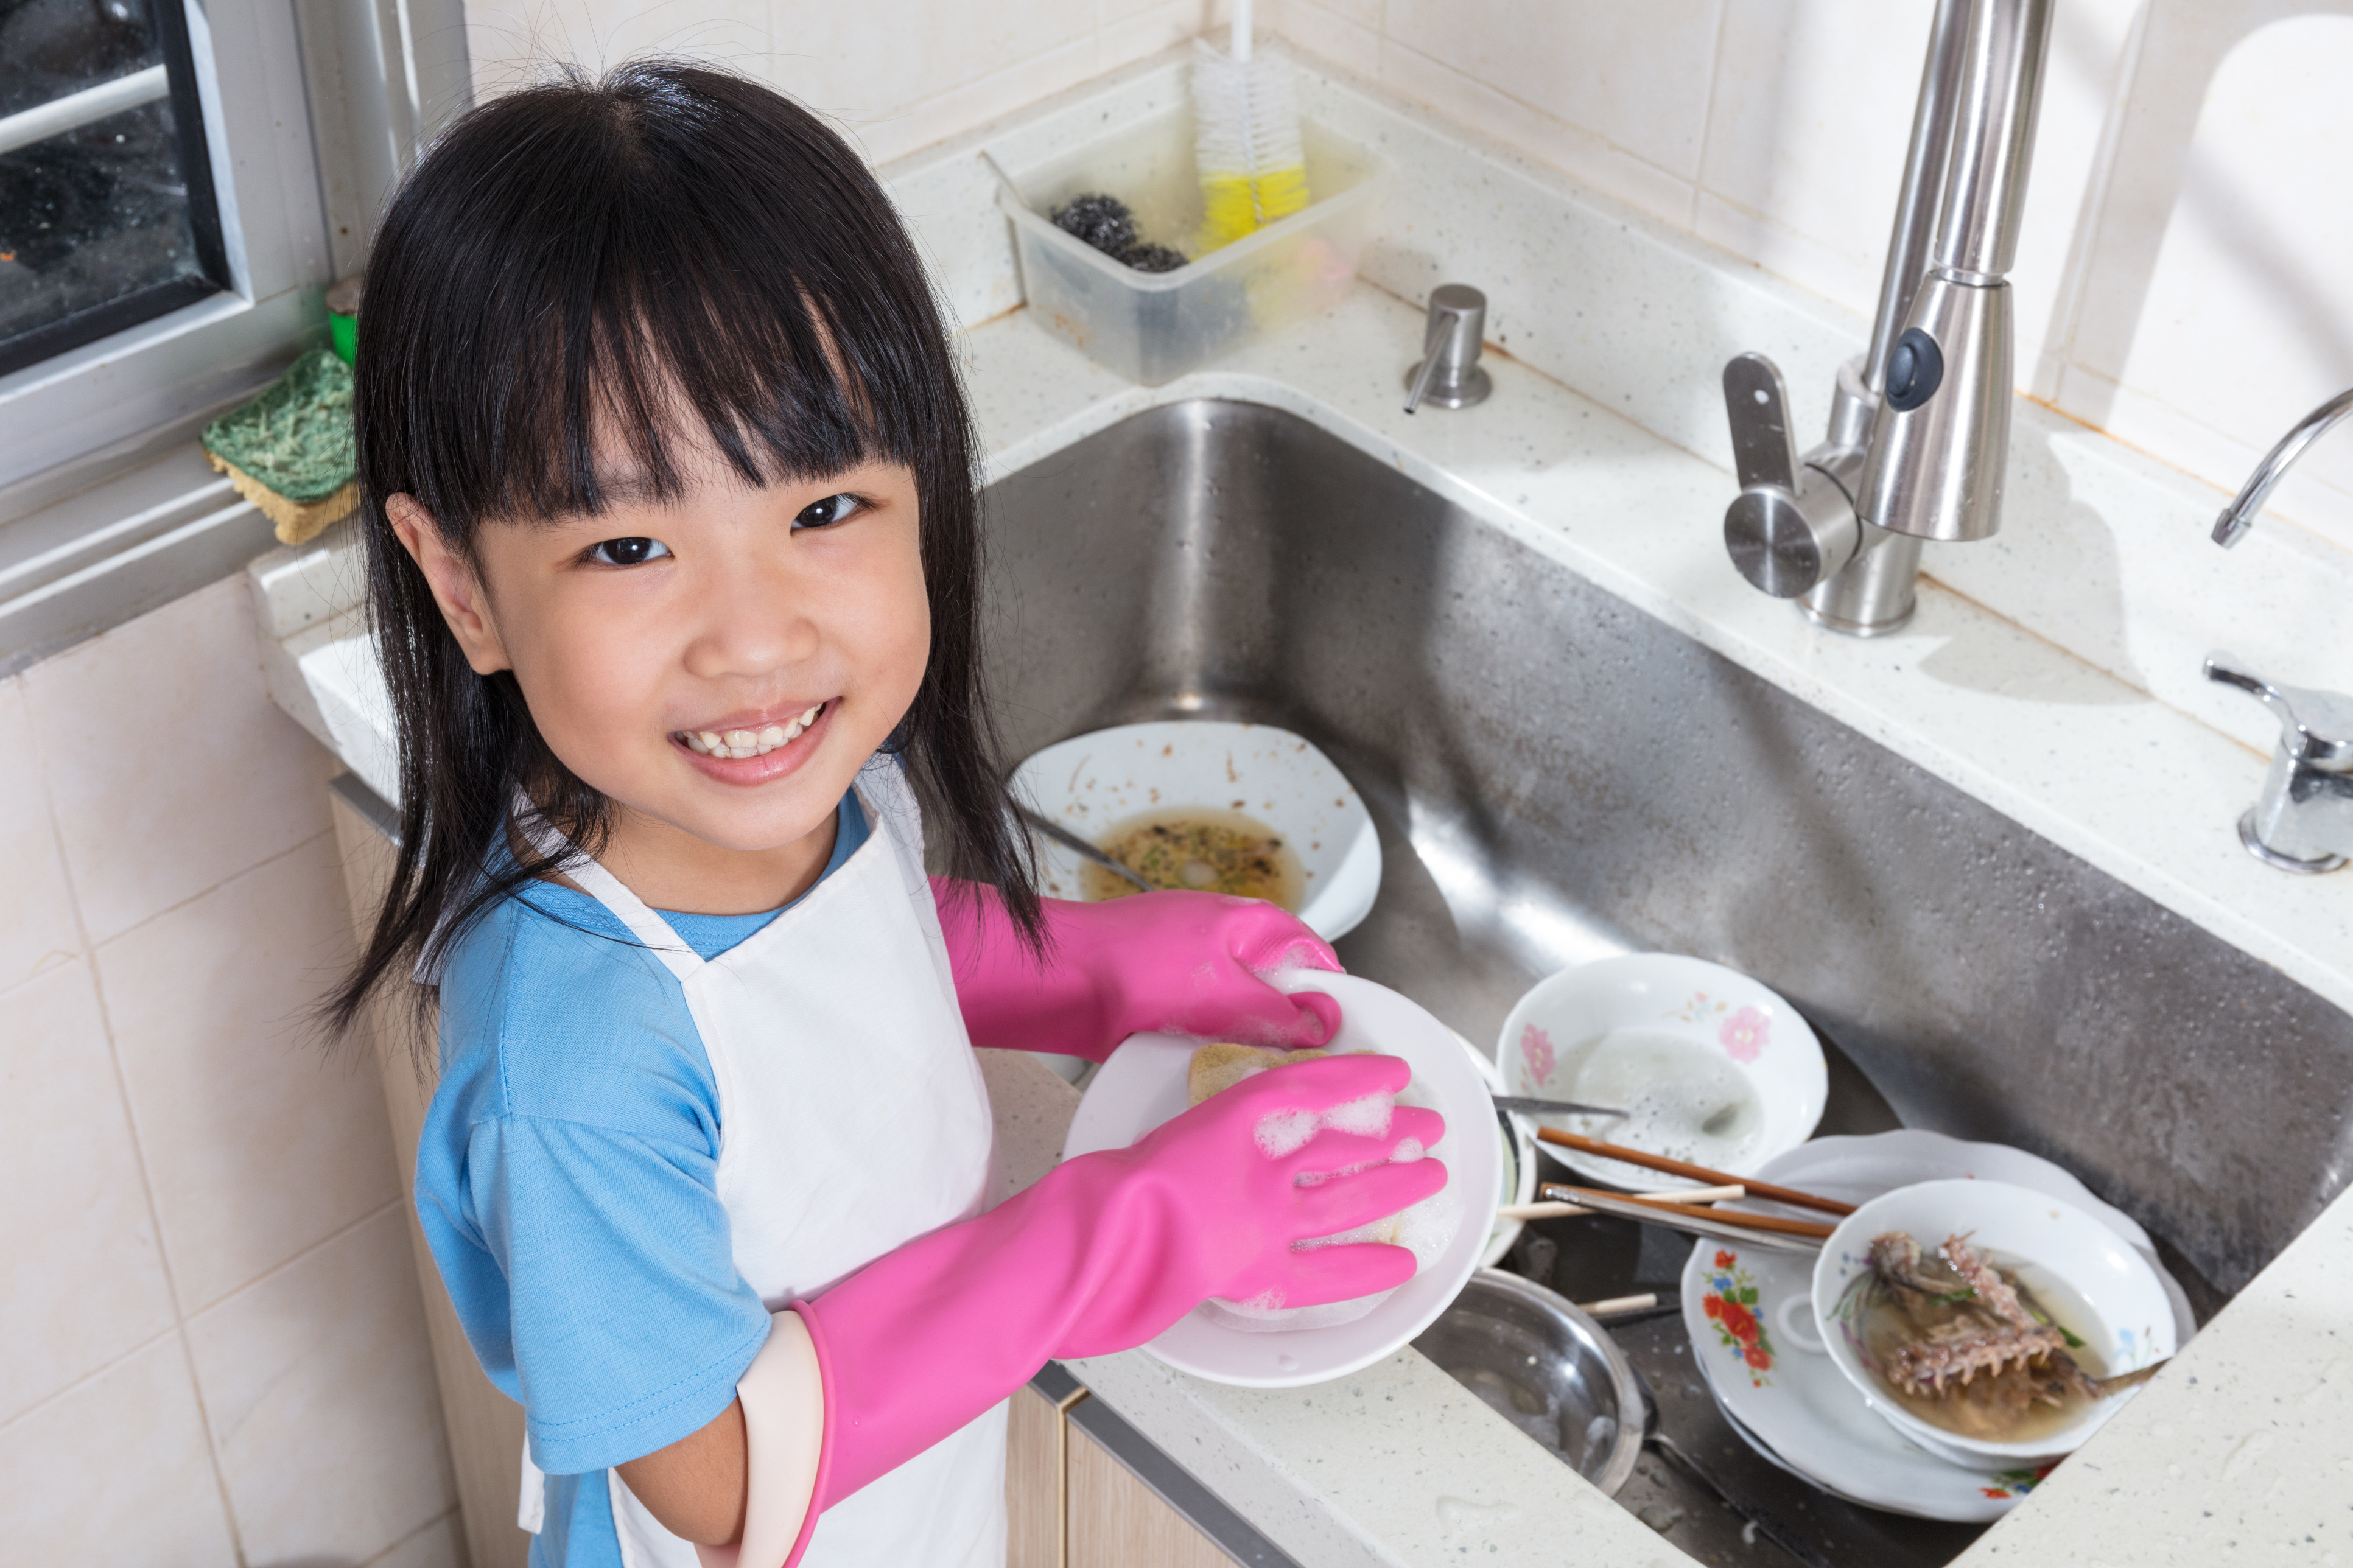 Kids and Chores: How to Get Them to Pitch In?